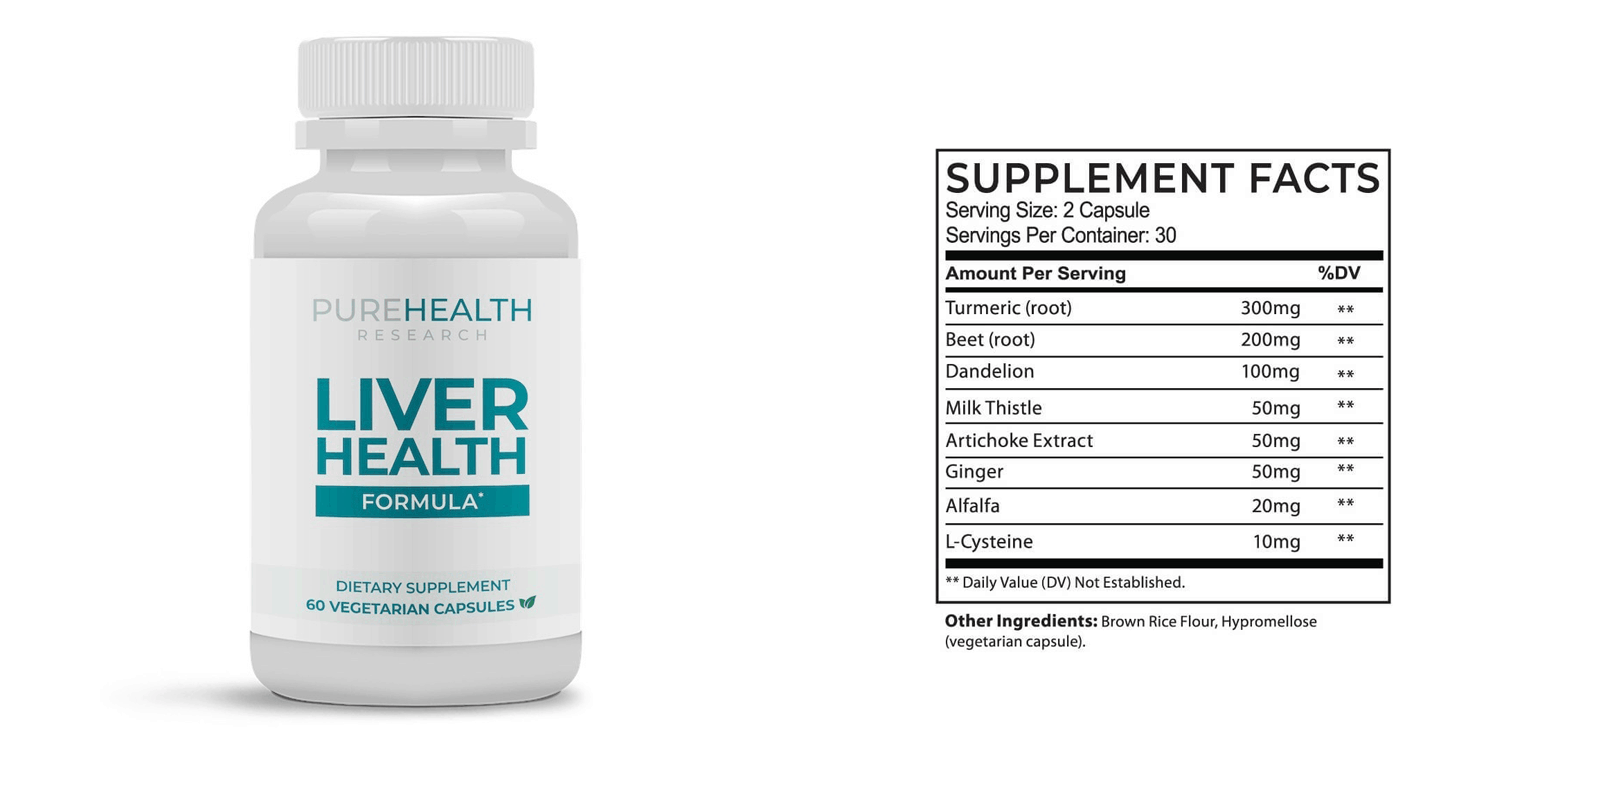 Recommended Dosage of this Liver Health Supplement